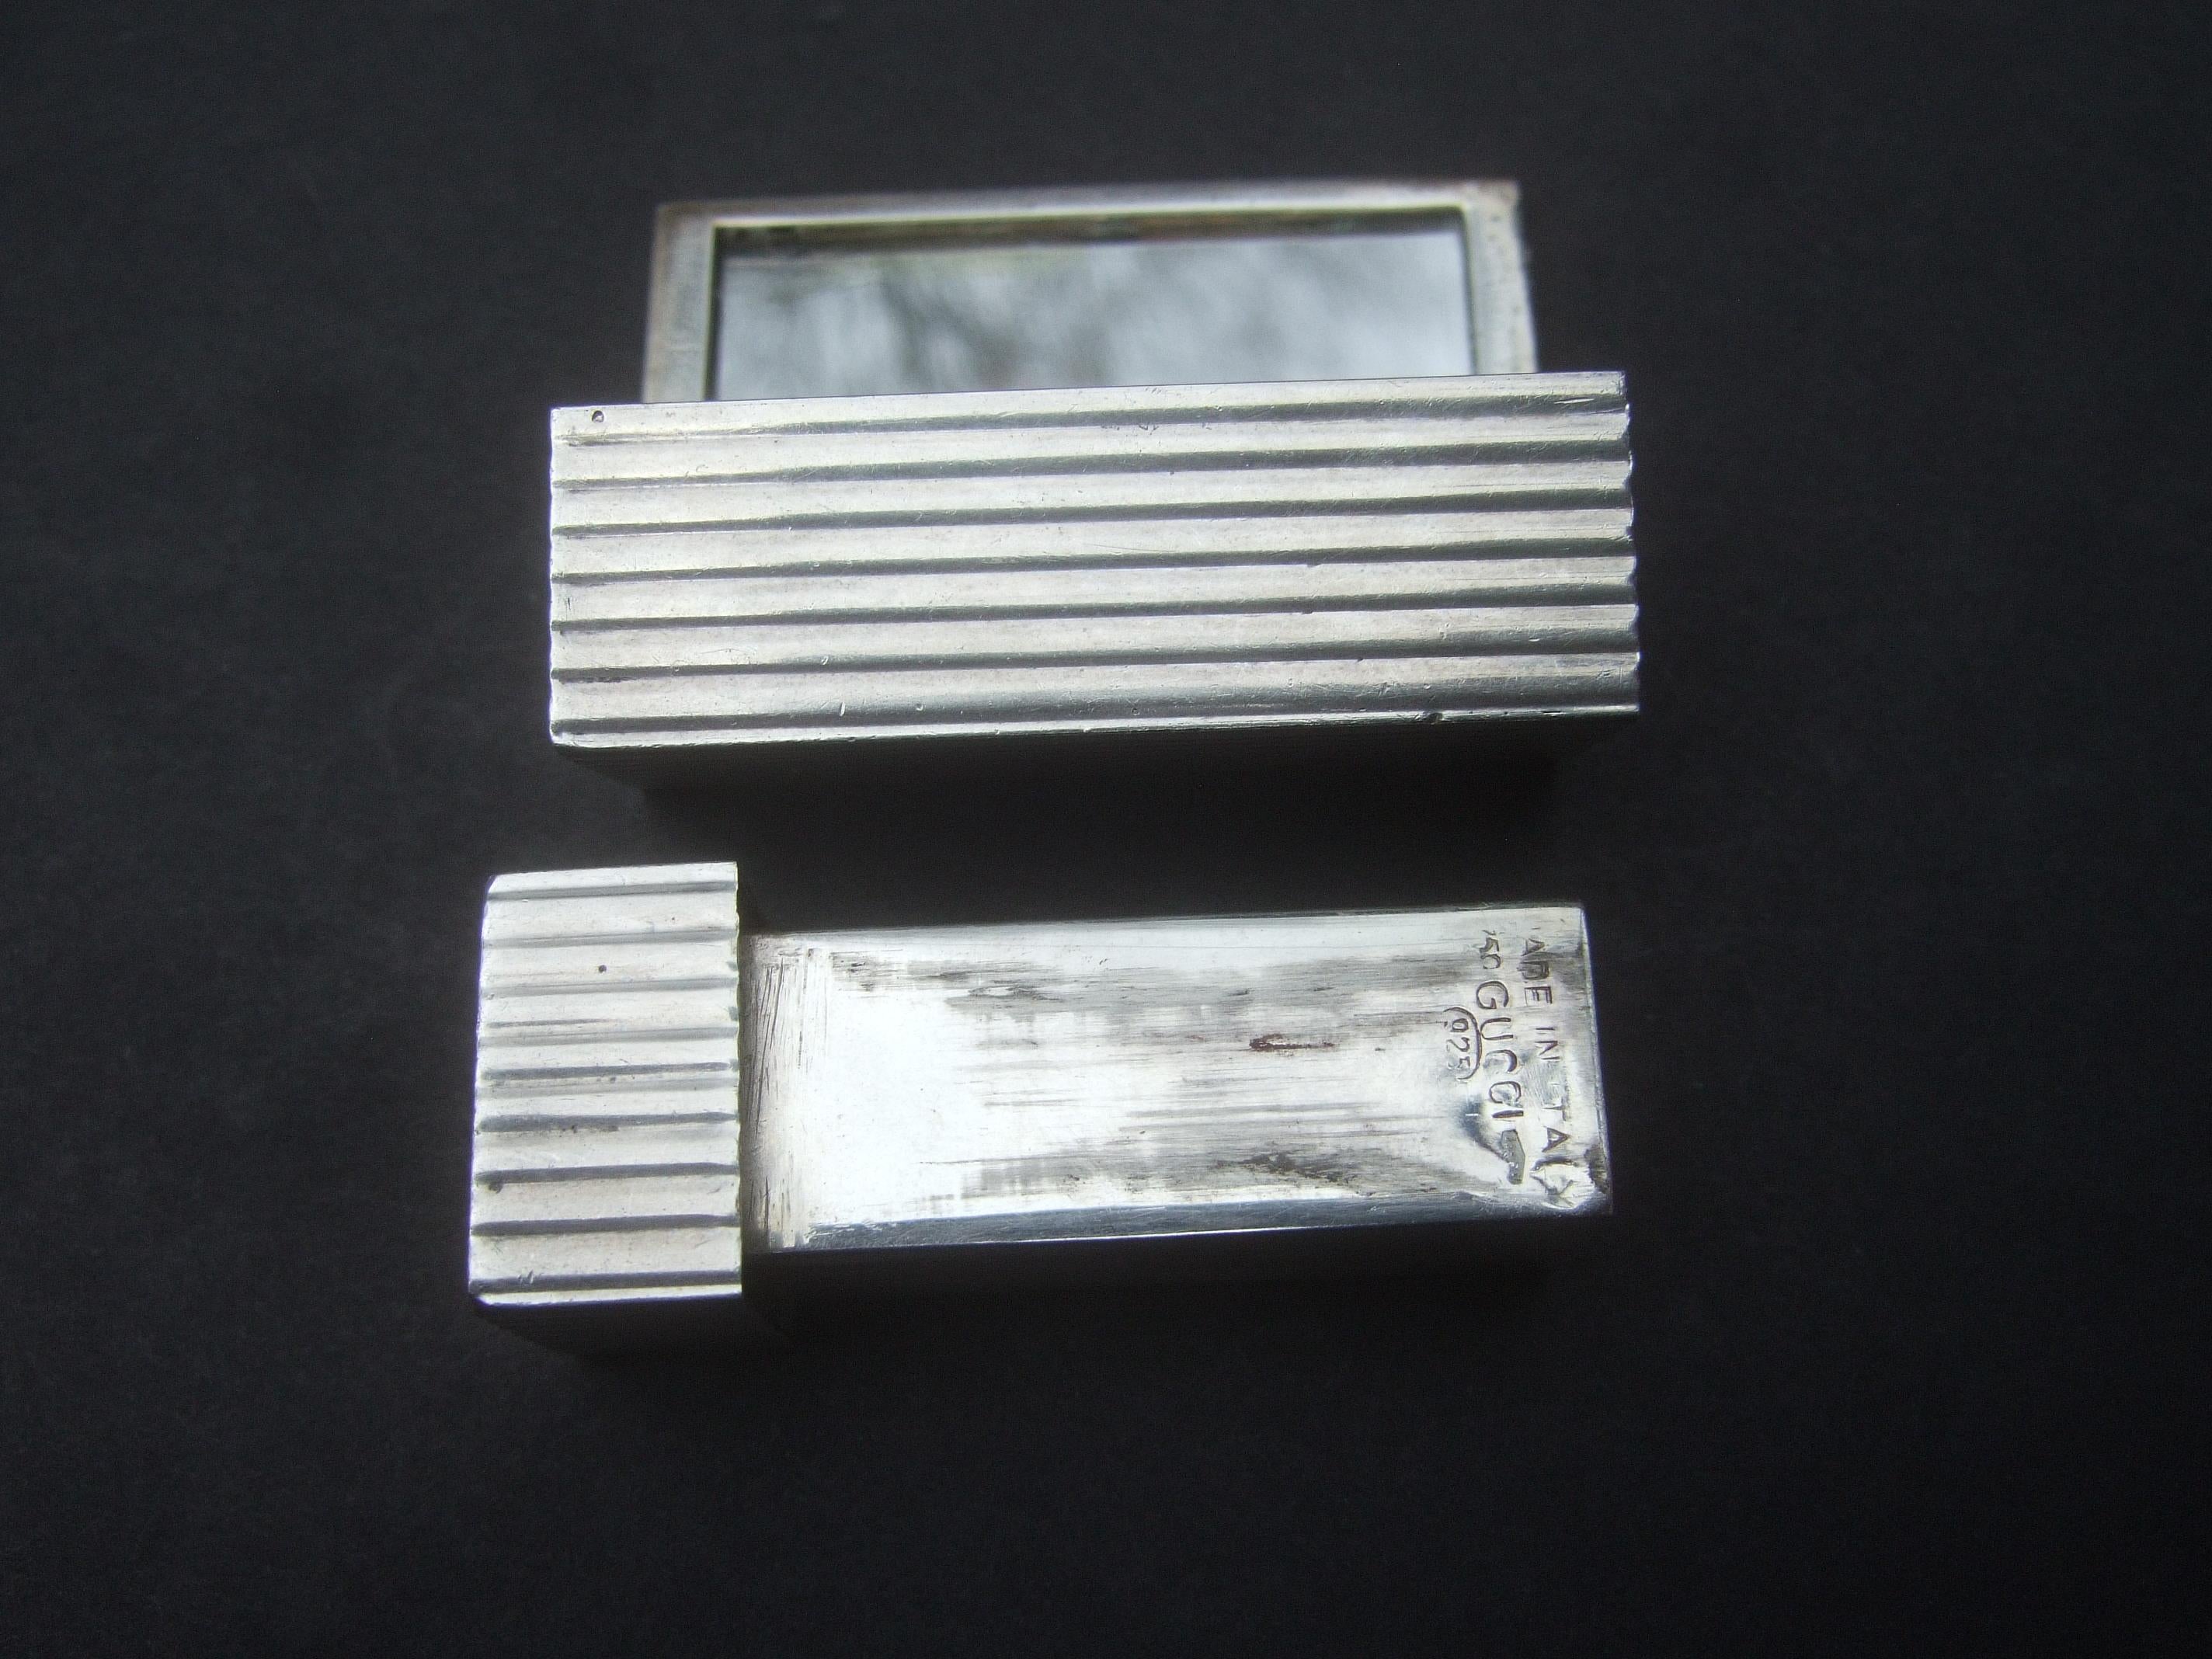 Gucci Italy Rare Sterling Silver Sleek Lipstick Vanity Mirror Case c 1970s For Sale 4